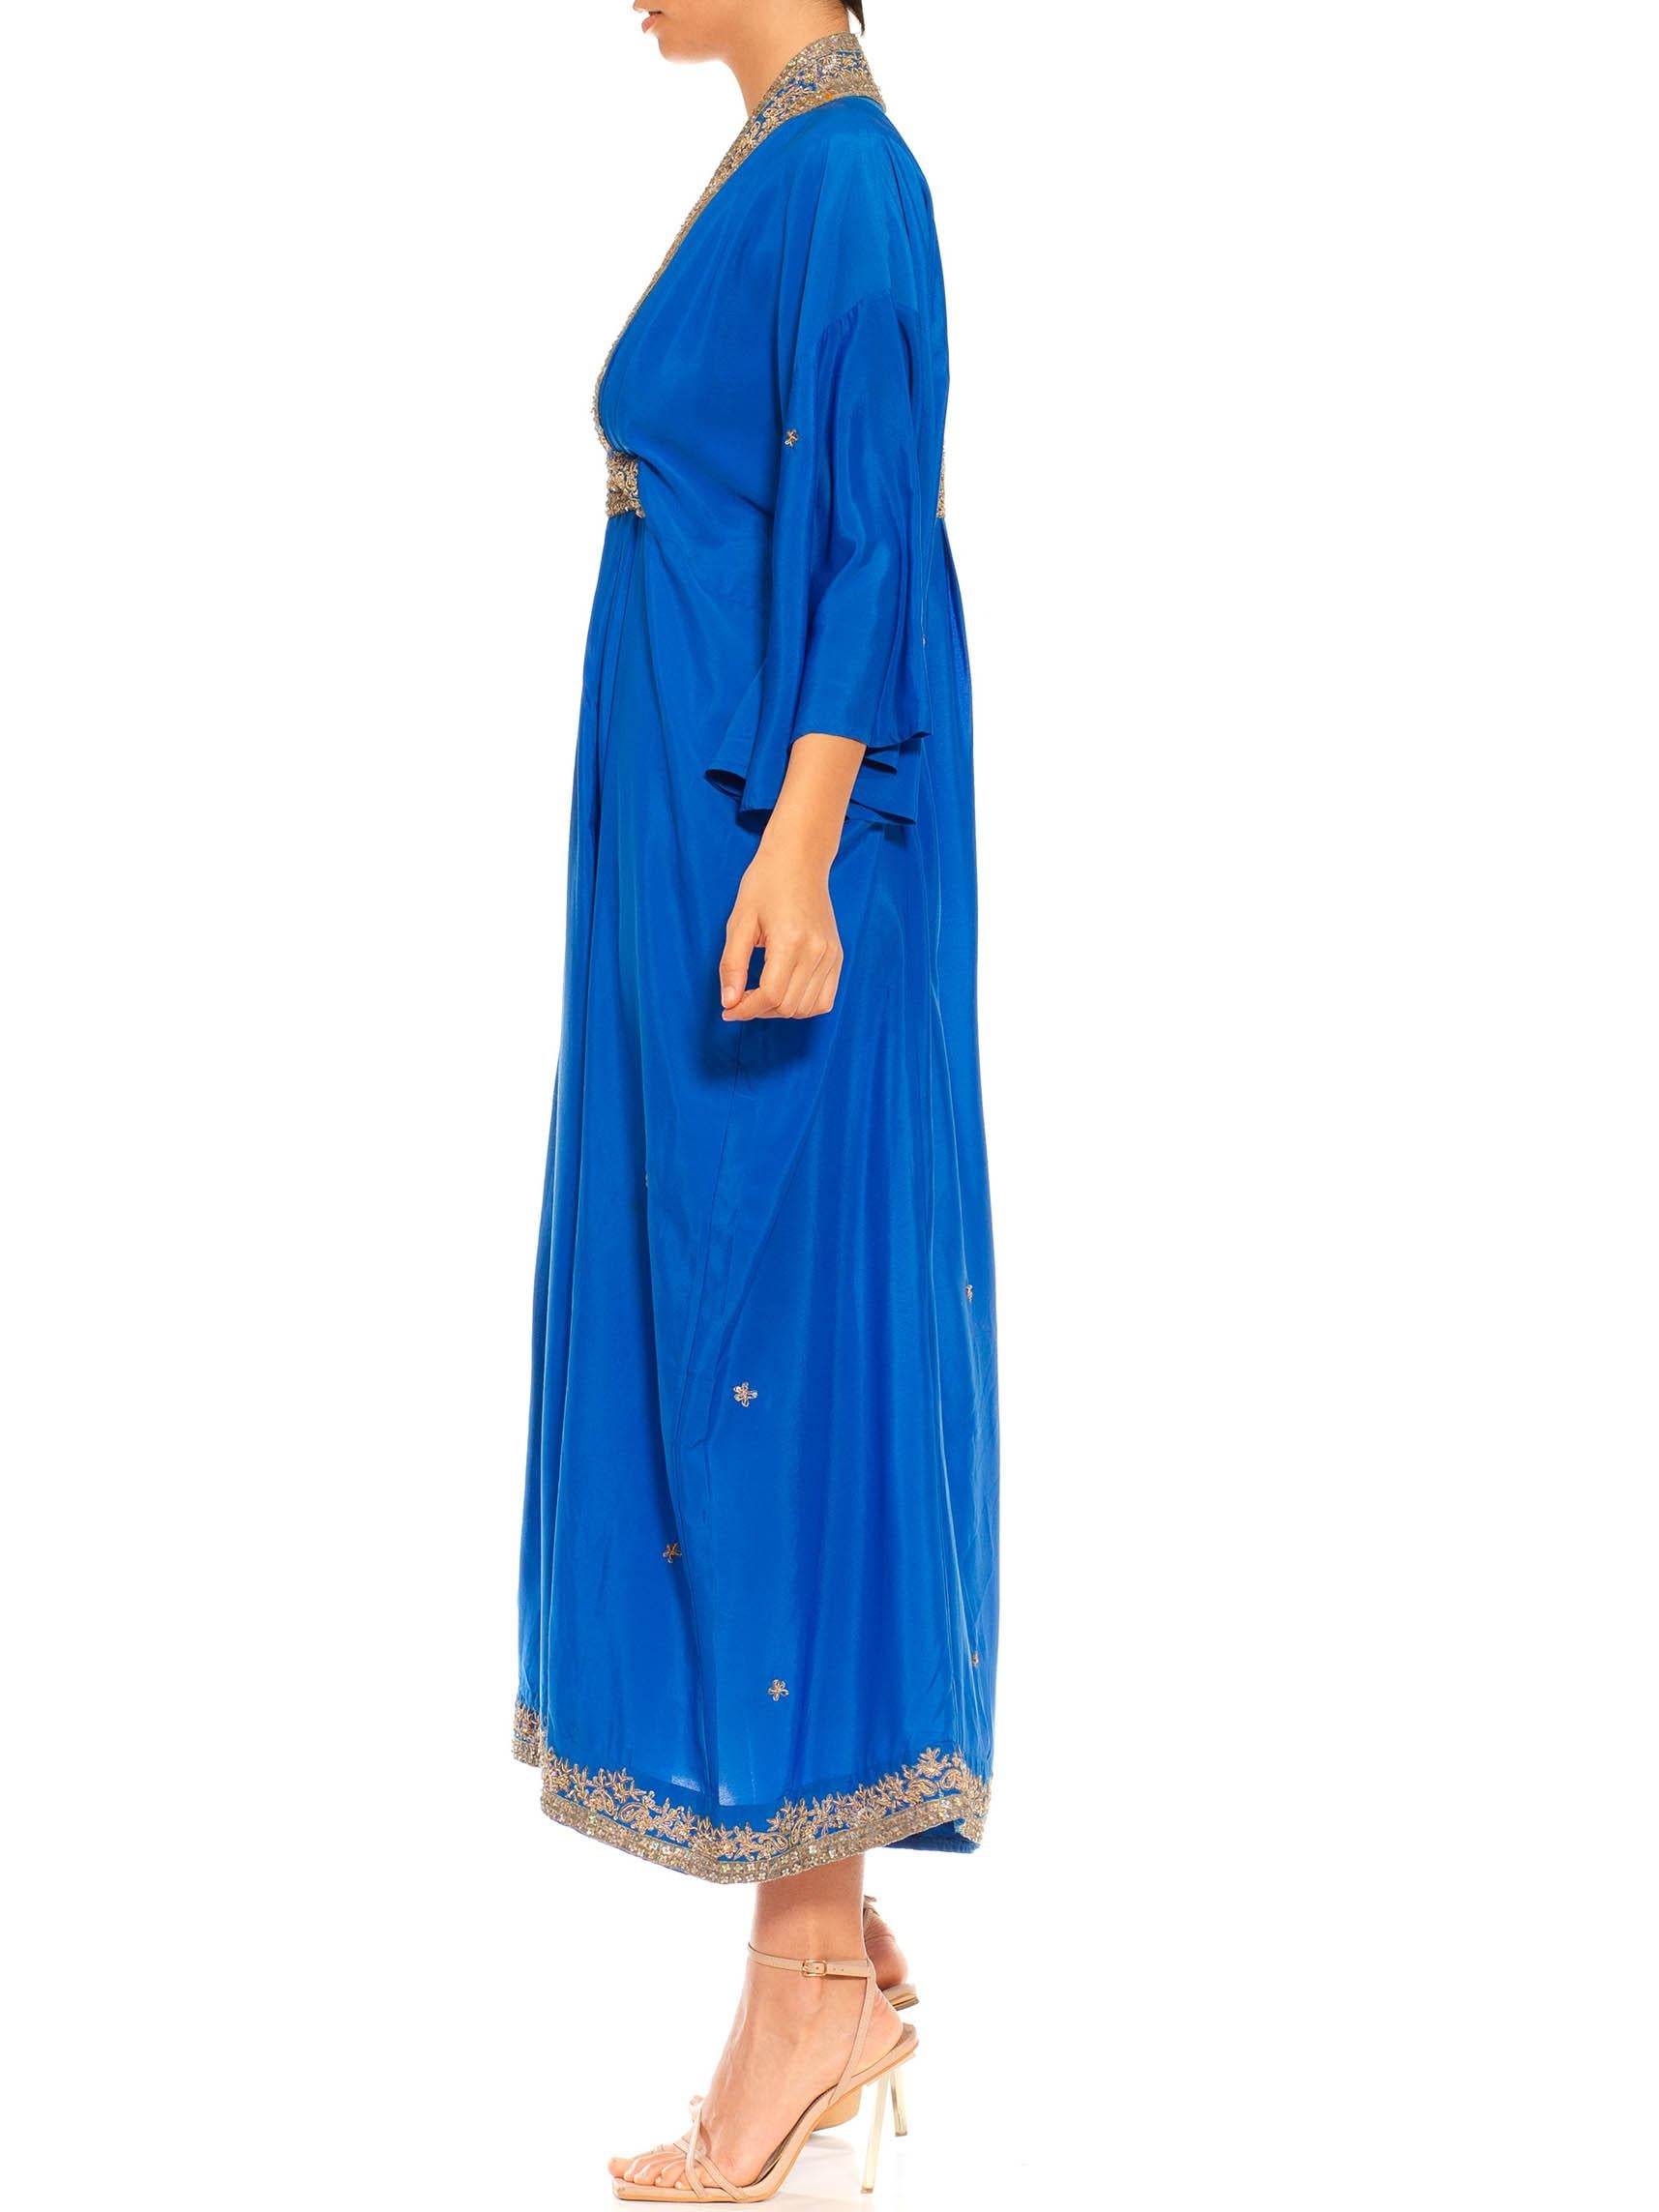 Morphew Collection Royal Blue Silk Kaftan With Sequined Silver Trimmings Made From Vintage Saris
MORPHEW COLLECTION is made entirely by hand in our NYC Ateliér of rare antique materials sourced from around the globe. Our sustainable vintage